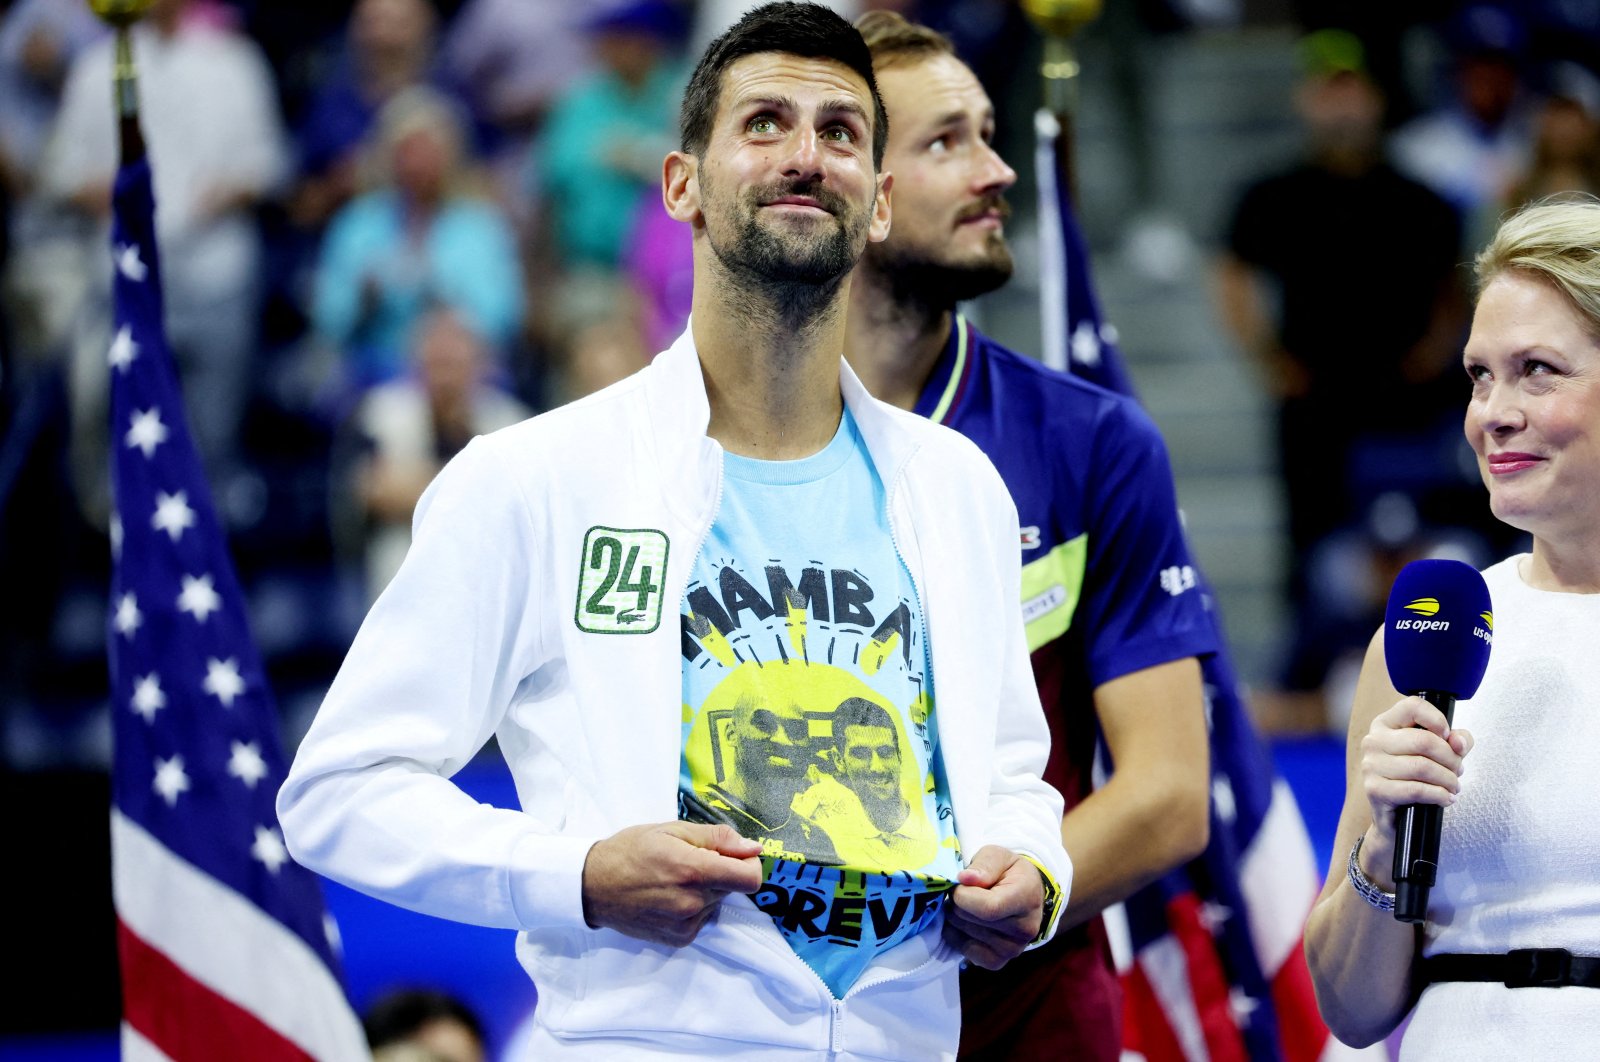 Serbia&#039;s Novak Djokovic celebrates while wearing a shirt with an image of Kobe Bryant after winning the U.S. Open Tennis in Flushing Meadows, New York, U.S., Sept. 10, 2023. (Reuters Photo)